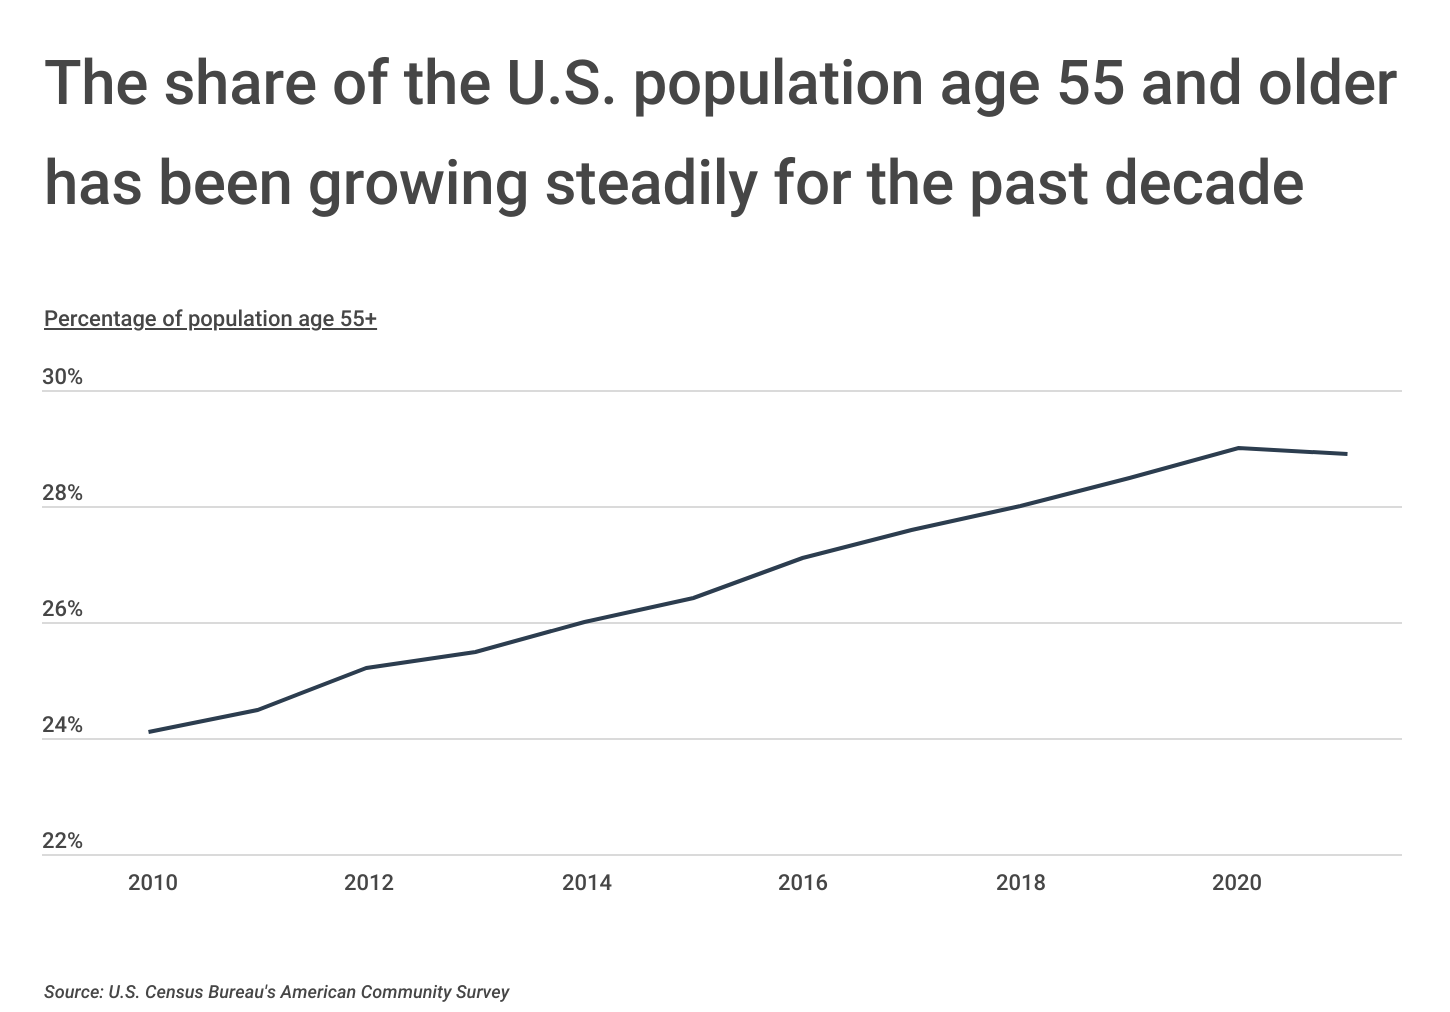 Chart1_The 55+ population share has been growing for the past decade